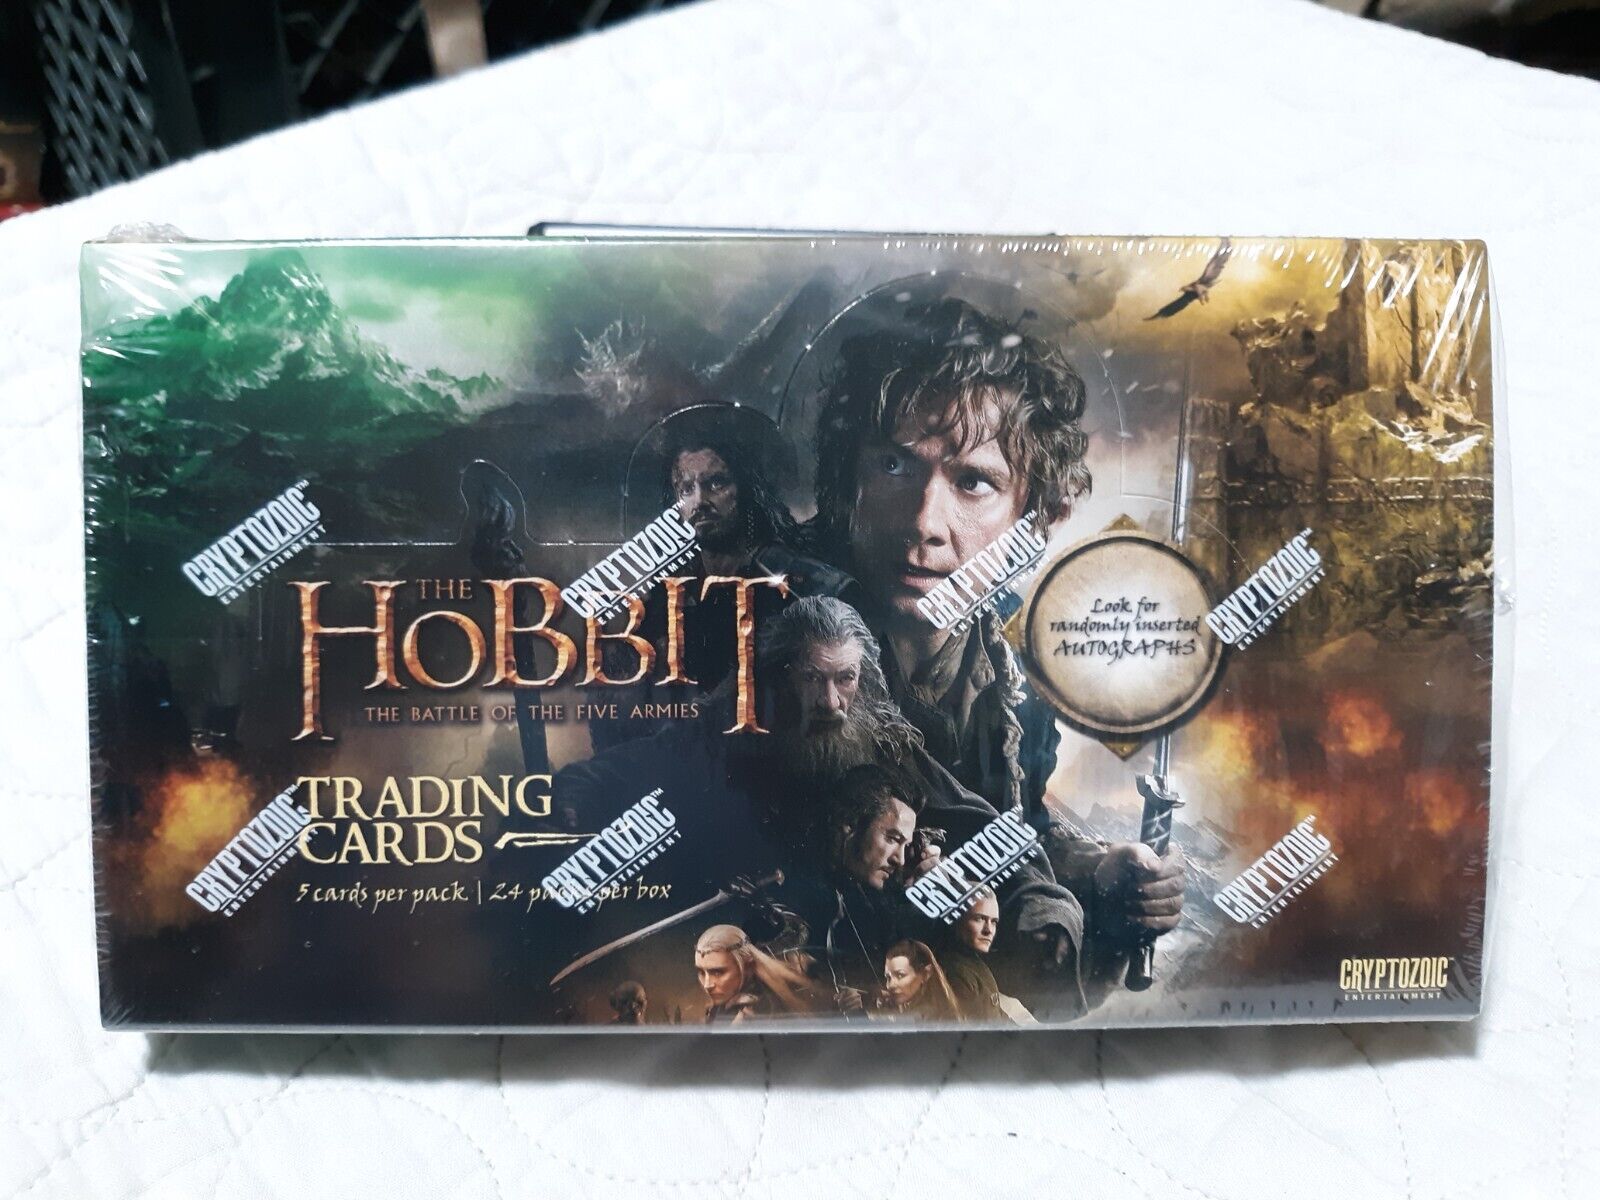 2016 Cryptozoic Hobbit The Battle of the Five Armies Box